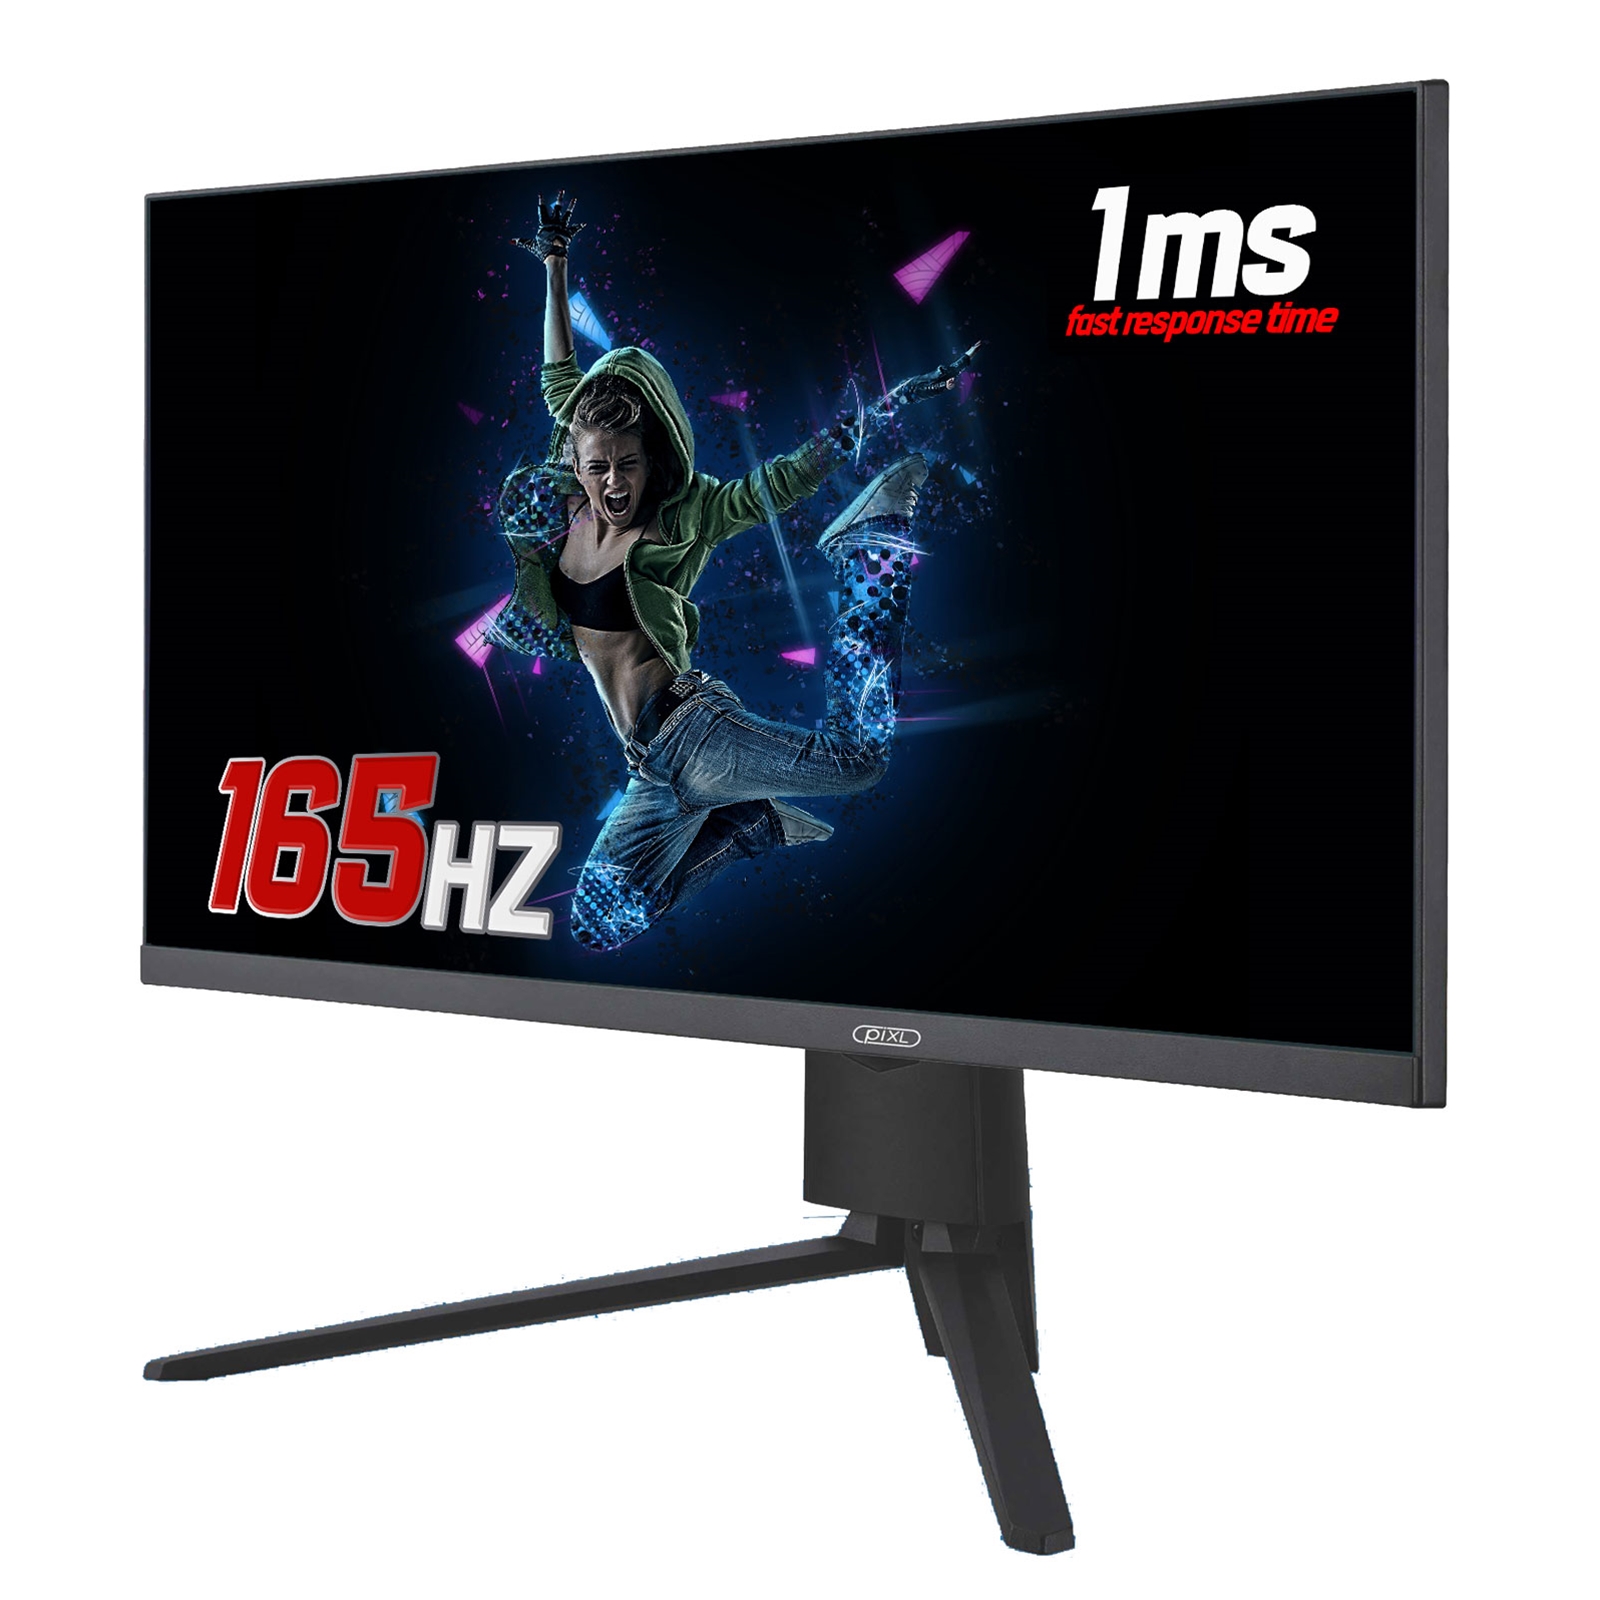 piXL CM24F10 24 Inch Frameless Gaming Monitor, Widescreen LCD Panel, Full HD 1920x1080, 1ms Response Time, 165Hz Refresh, Display Port / HDMI, 16.7 Million Colour Support, VESA Wall Mount, Black Finish